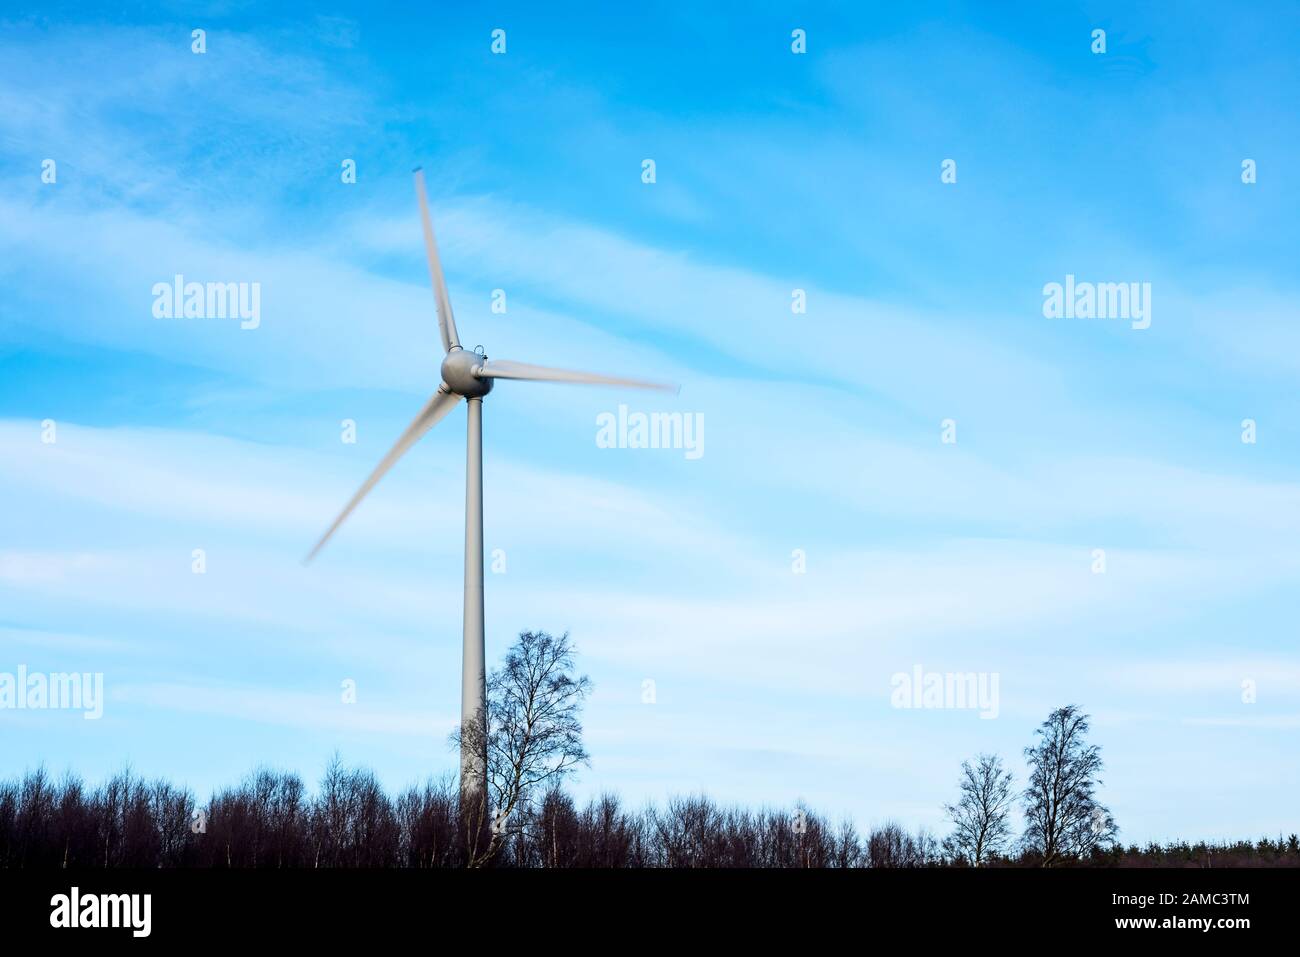 Three bladed wind turbine generator and pylon situated above Stracathro, Angus, Scotland, UK surrounded by trees, blades blurred revealing motion. Stock Photo